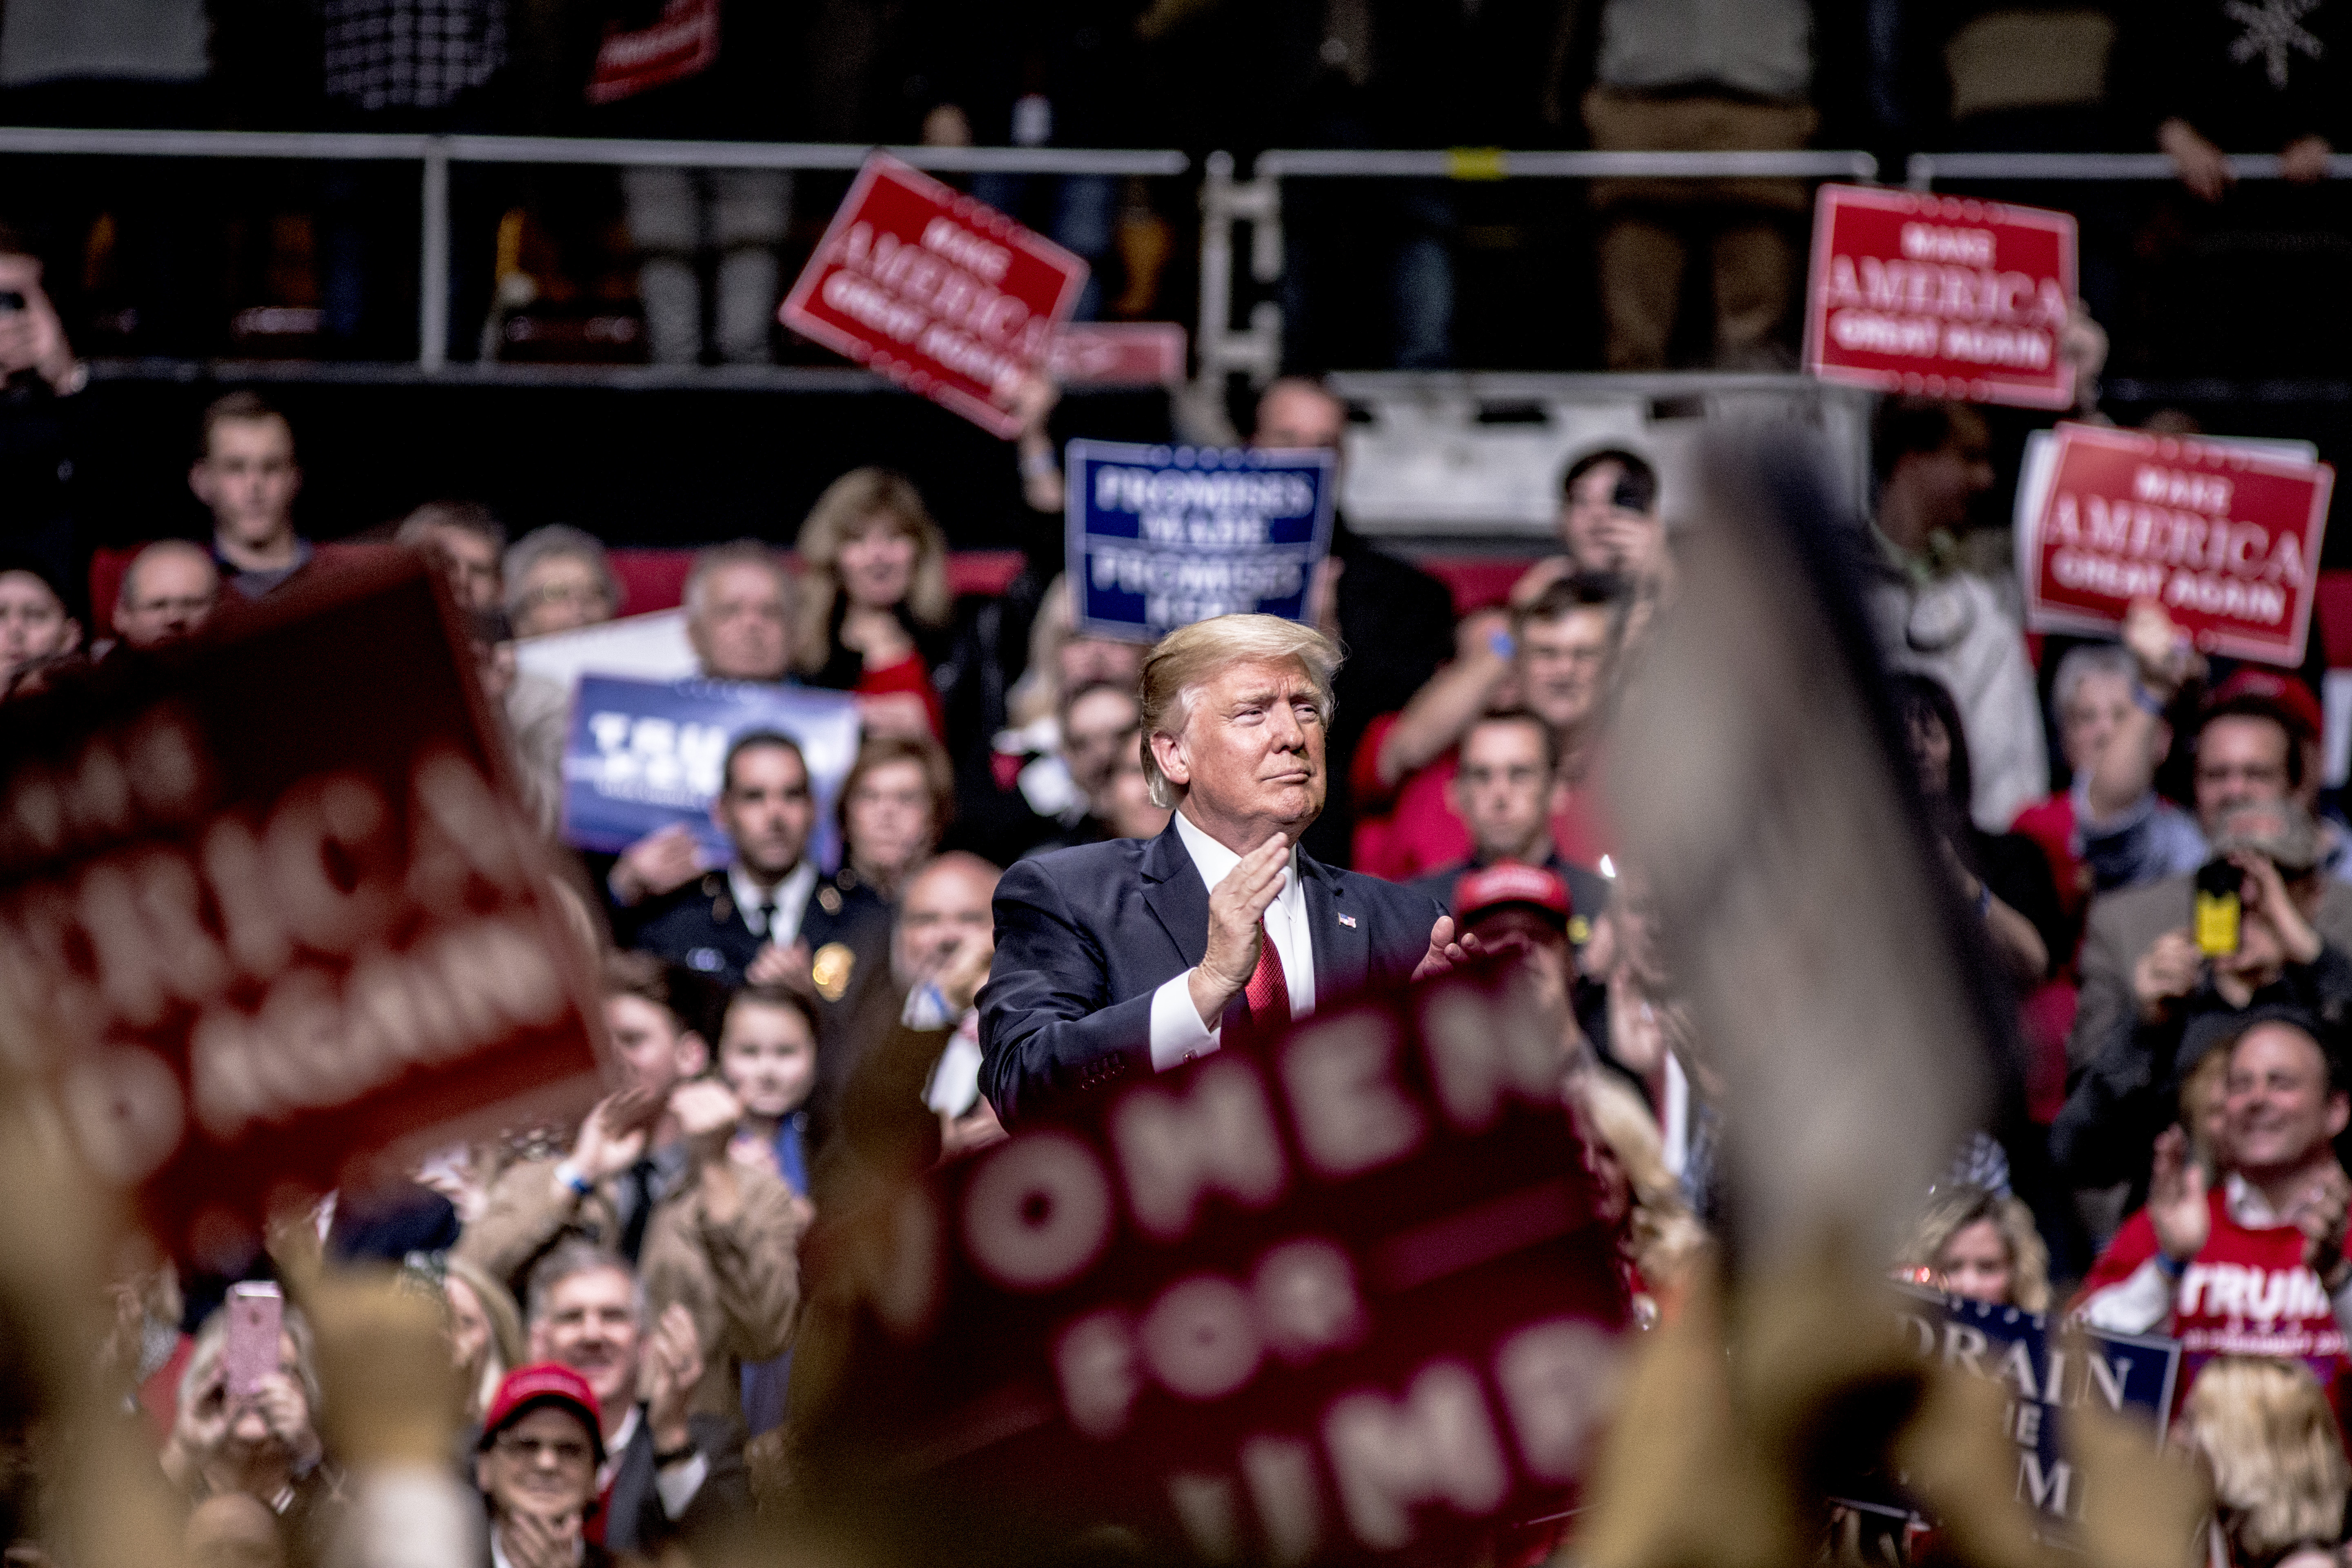 Donald Trump at a rally in Tennessee in March 2017.